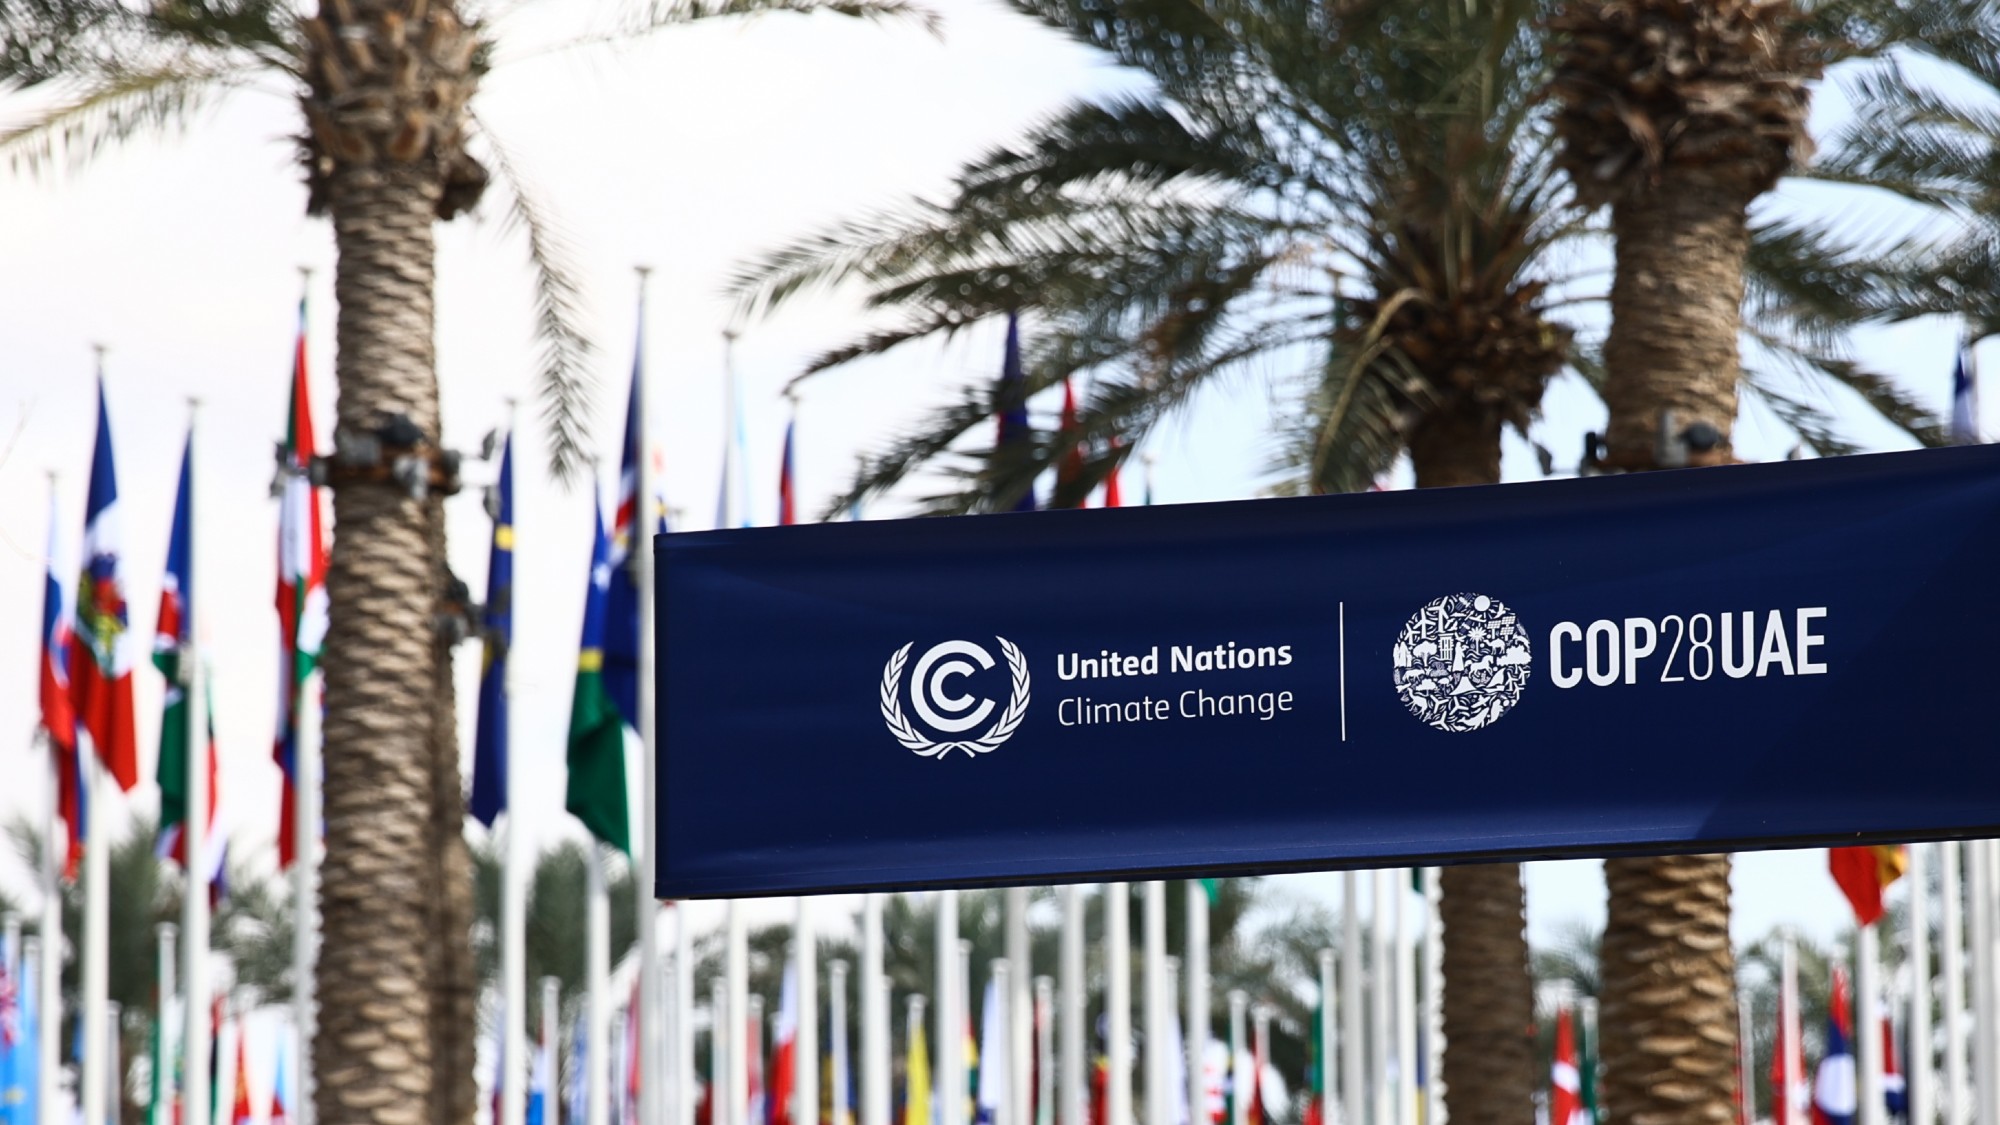  All the takeaways from COP28 